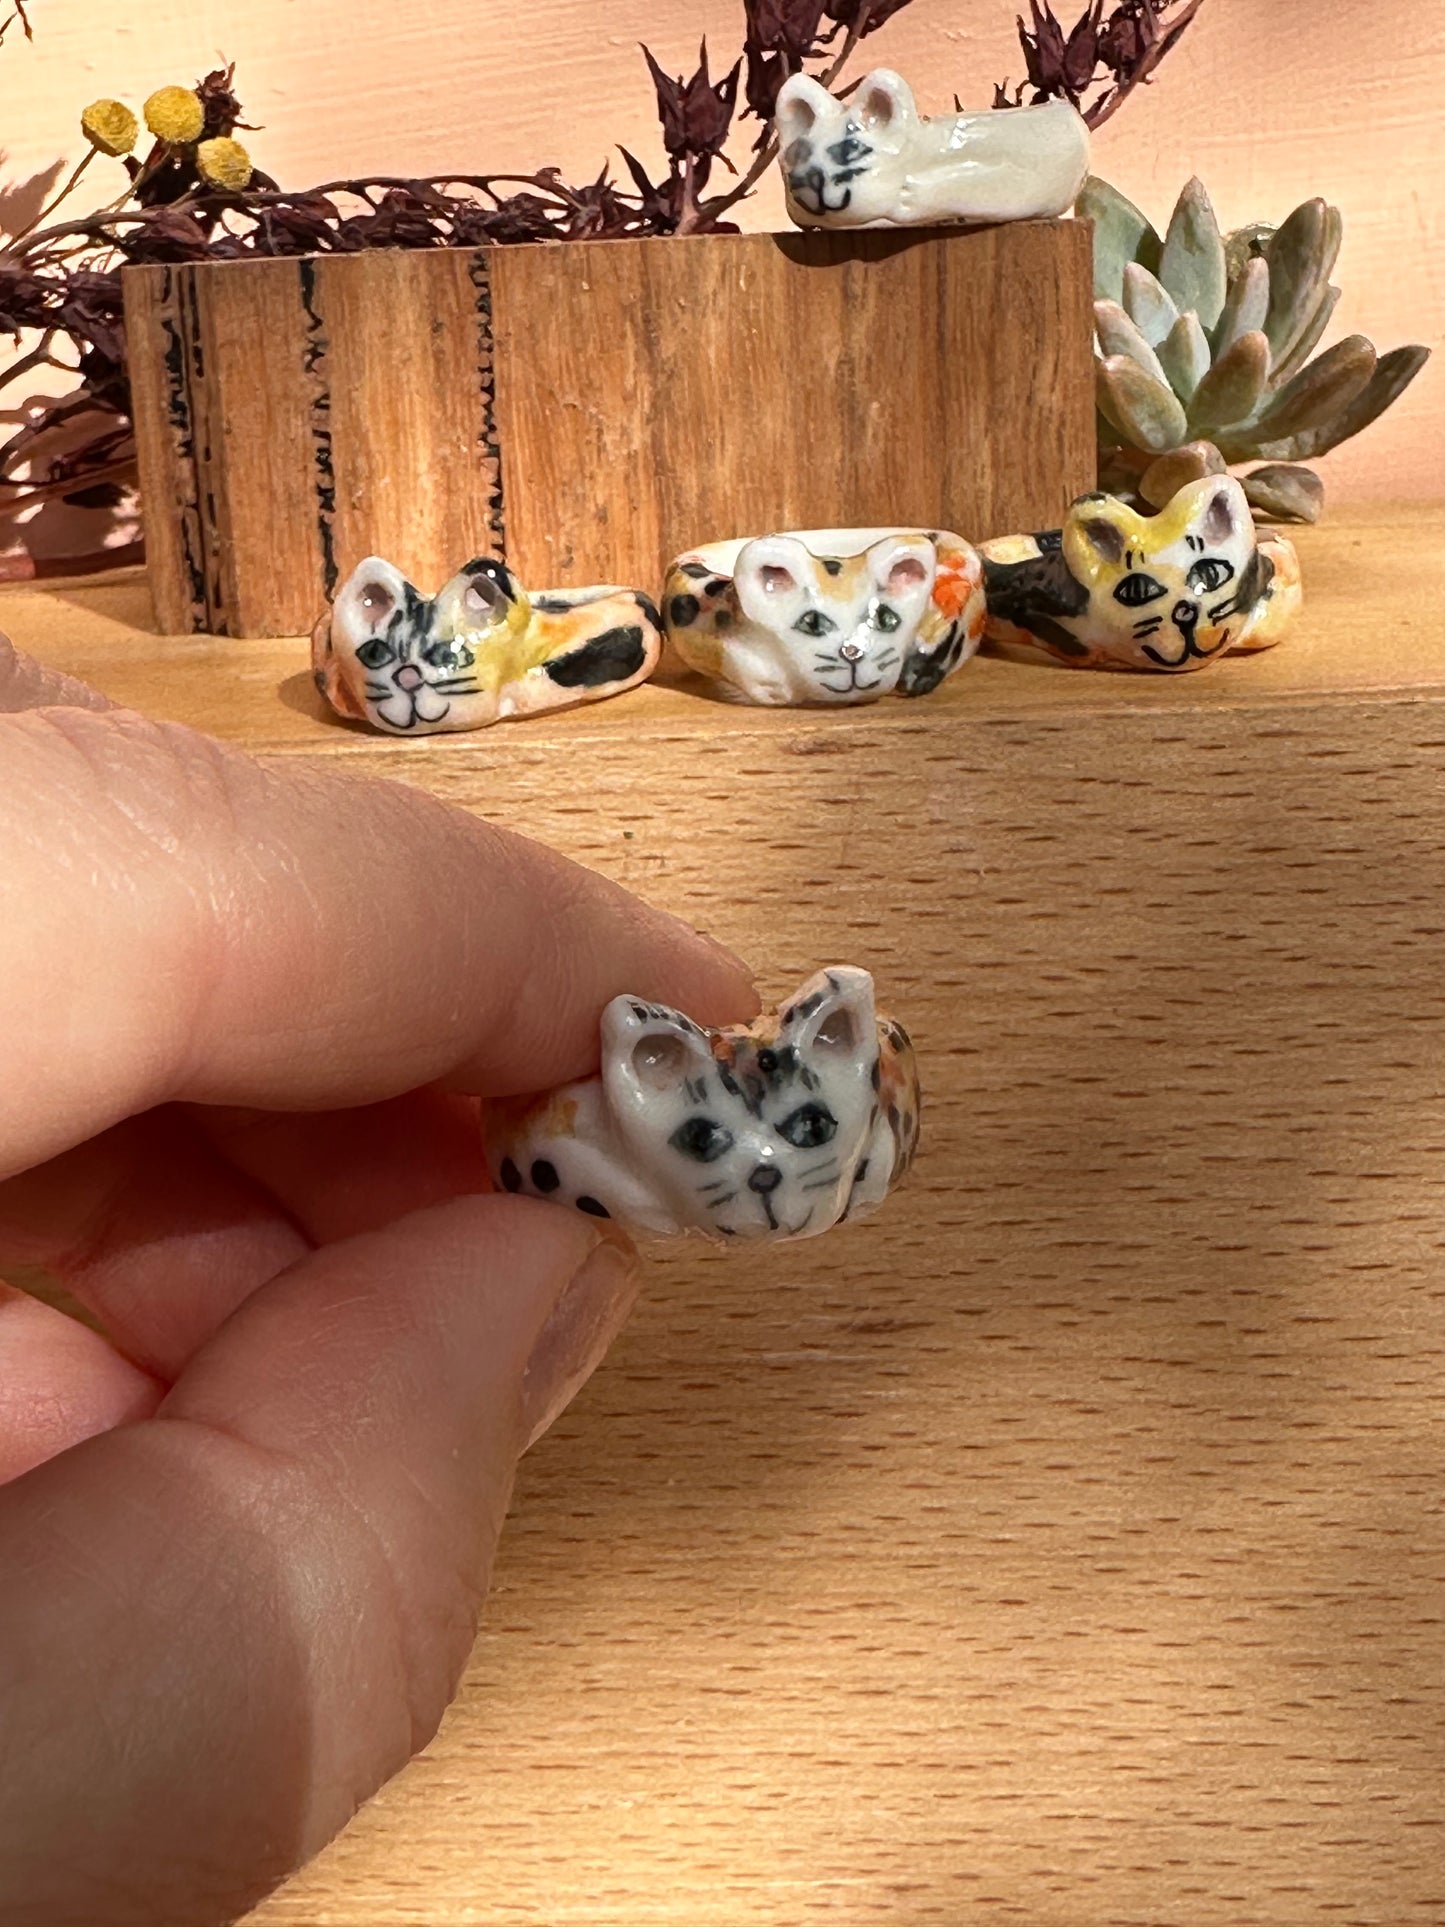 Hand made porcelain ‘cat’ ring, choose a size